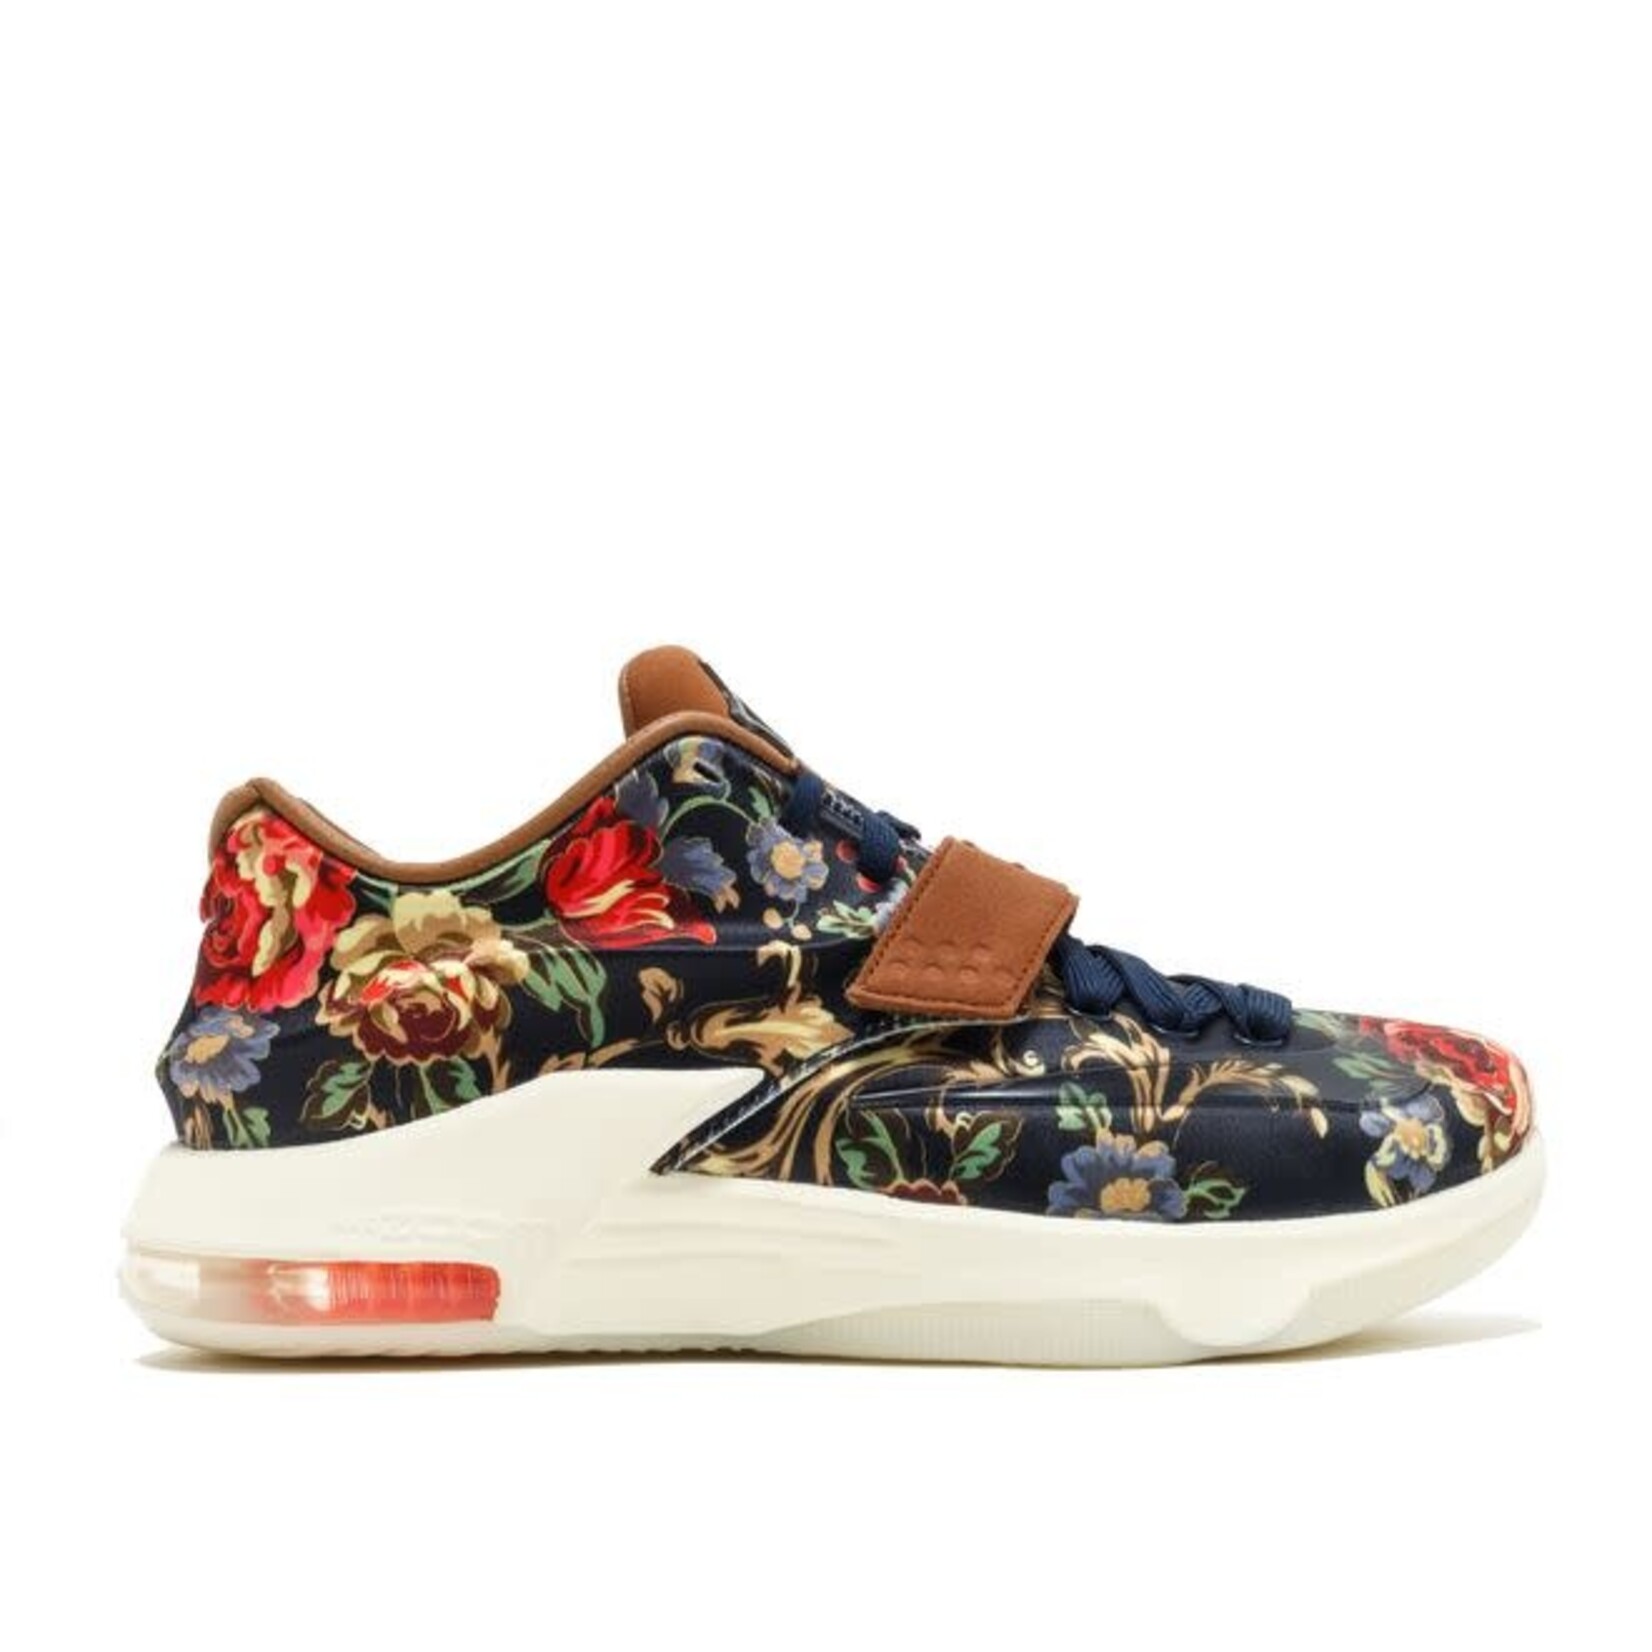 Nike Nike KD 7 EXT Floral Size 9.5, DS BRAND NEW